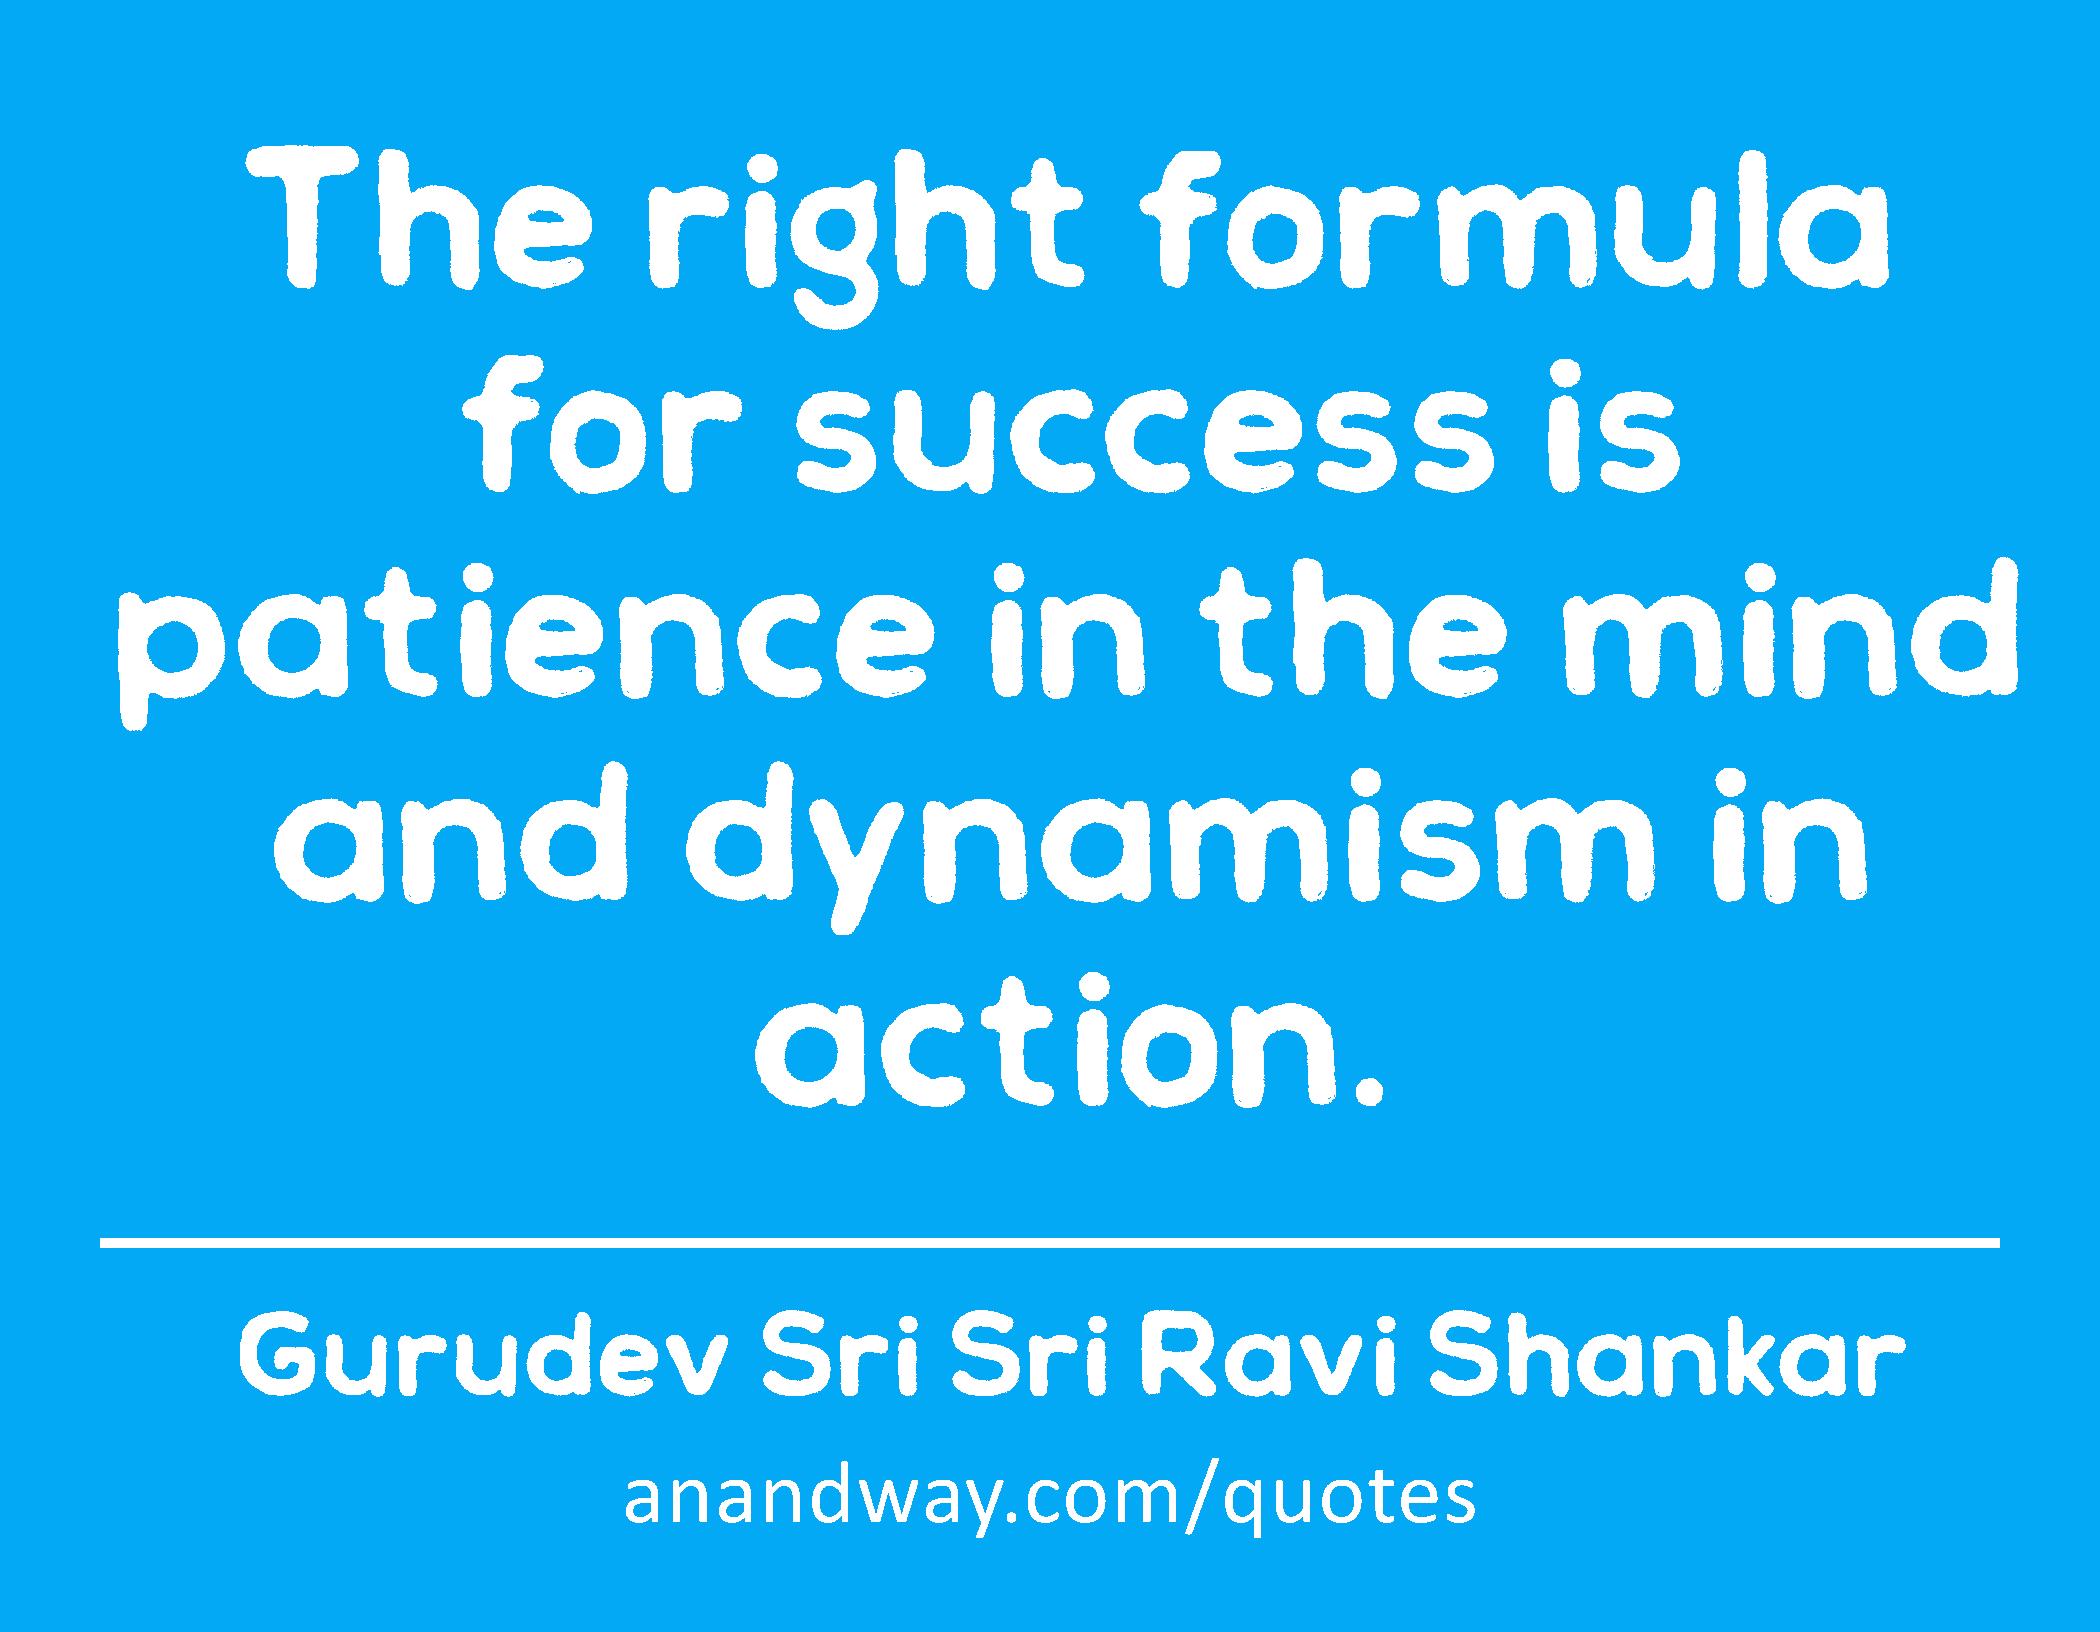 The right formula for success is patience in the mind and dynamism in action. 
 -Gurudev Sri Sri Ravi Shankar